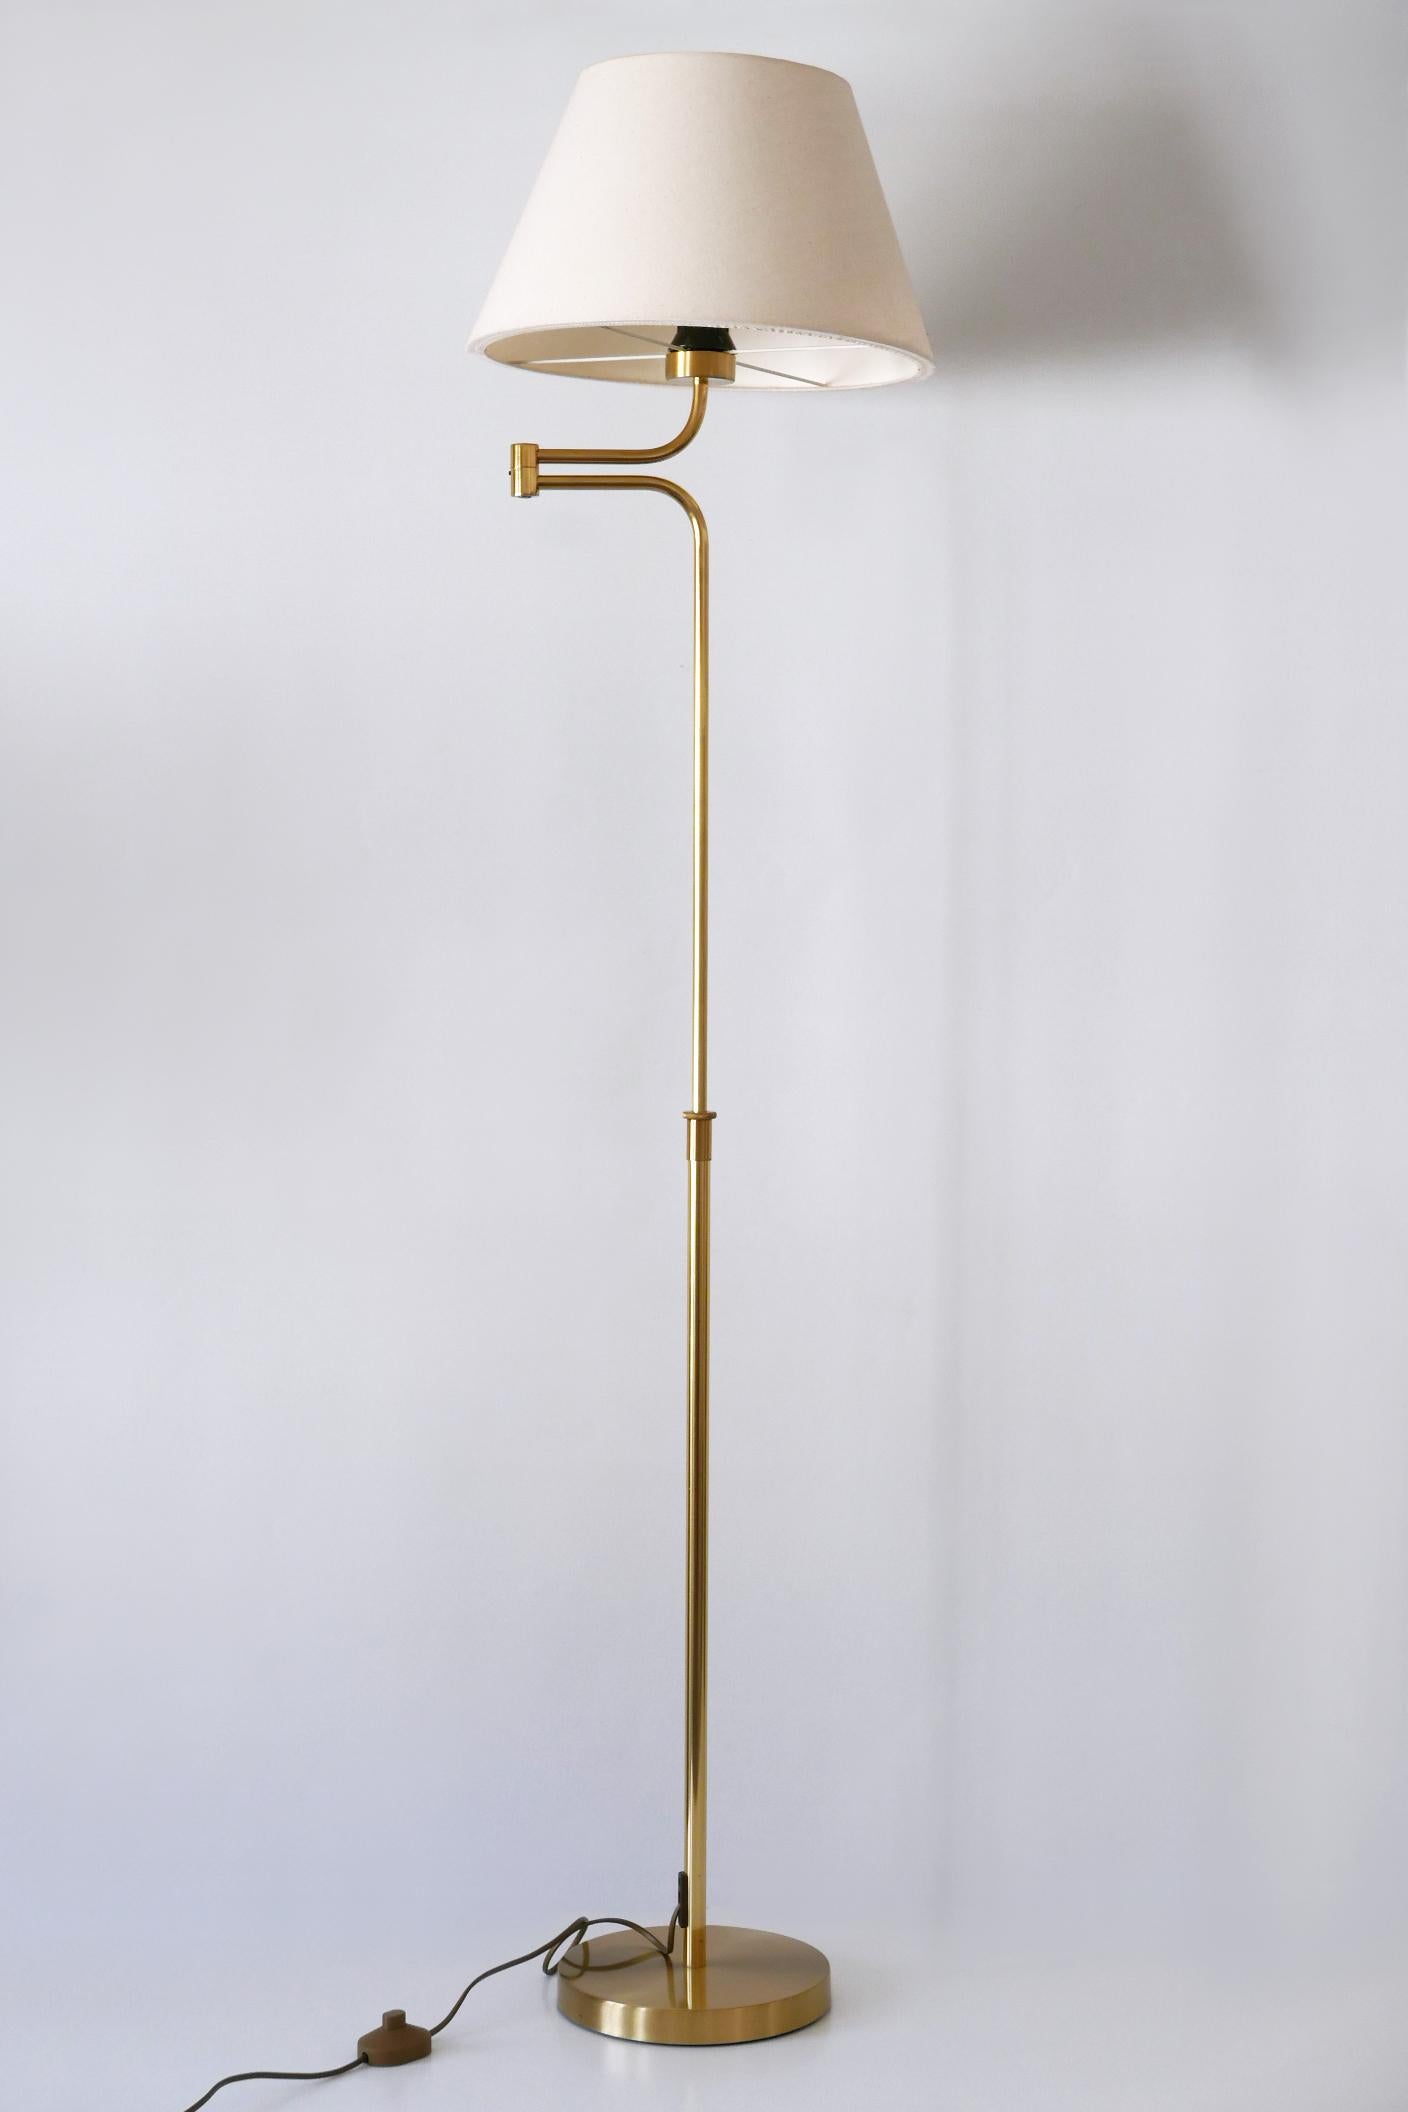 Vintage telescopic and rotating floor lamp or reading light. Adjustable in vertically and horizontally. Designed & manufactured by Sölken Leuchten, Germany, 1980s.

Executed in brass and fabric, the lamp needs 1 x E27 / E26 Edison screw fit bulb, is